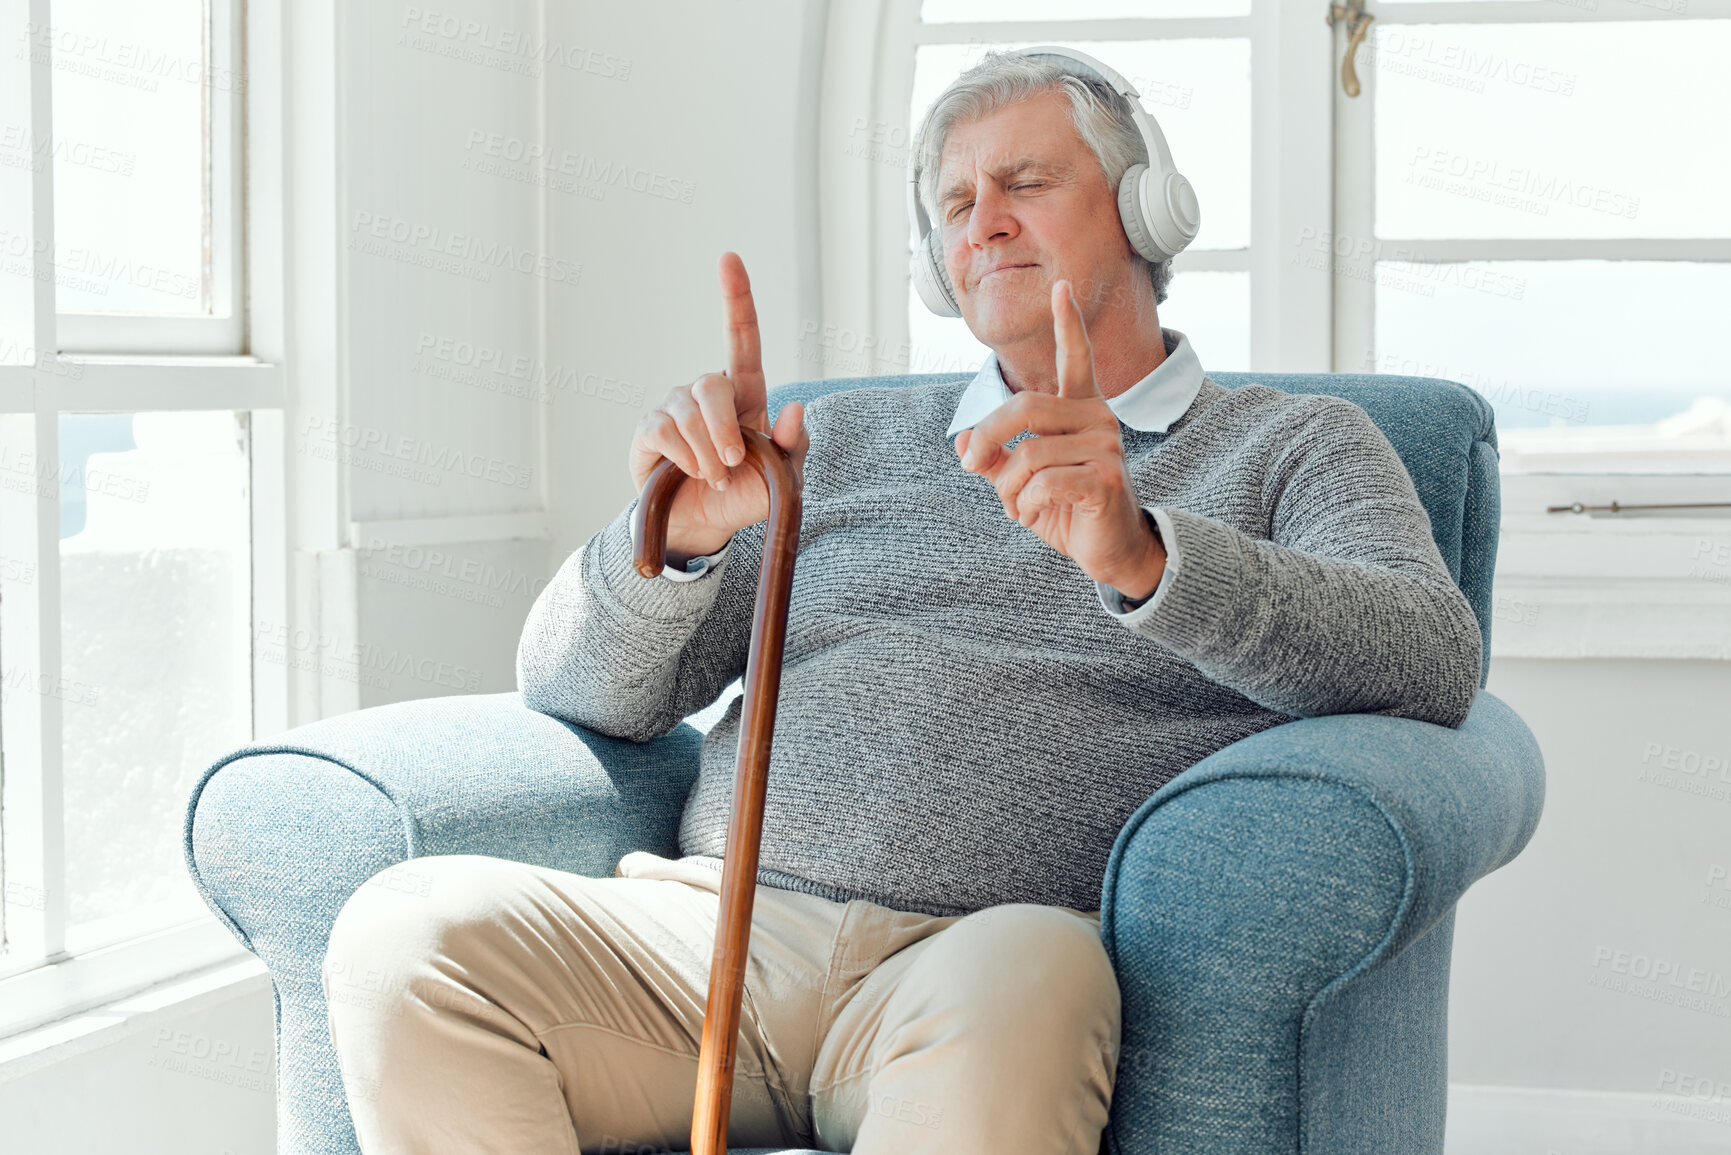 Buy stock photo Shot of an elderly man enjoying some music while sitting in the lounge at home